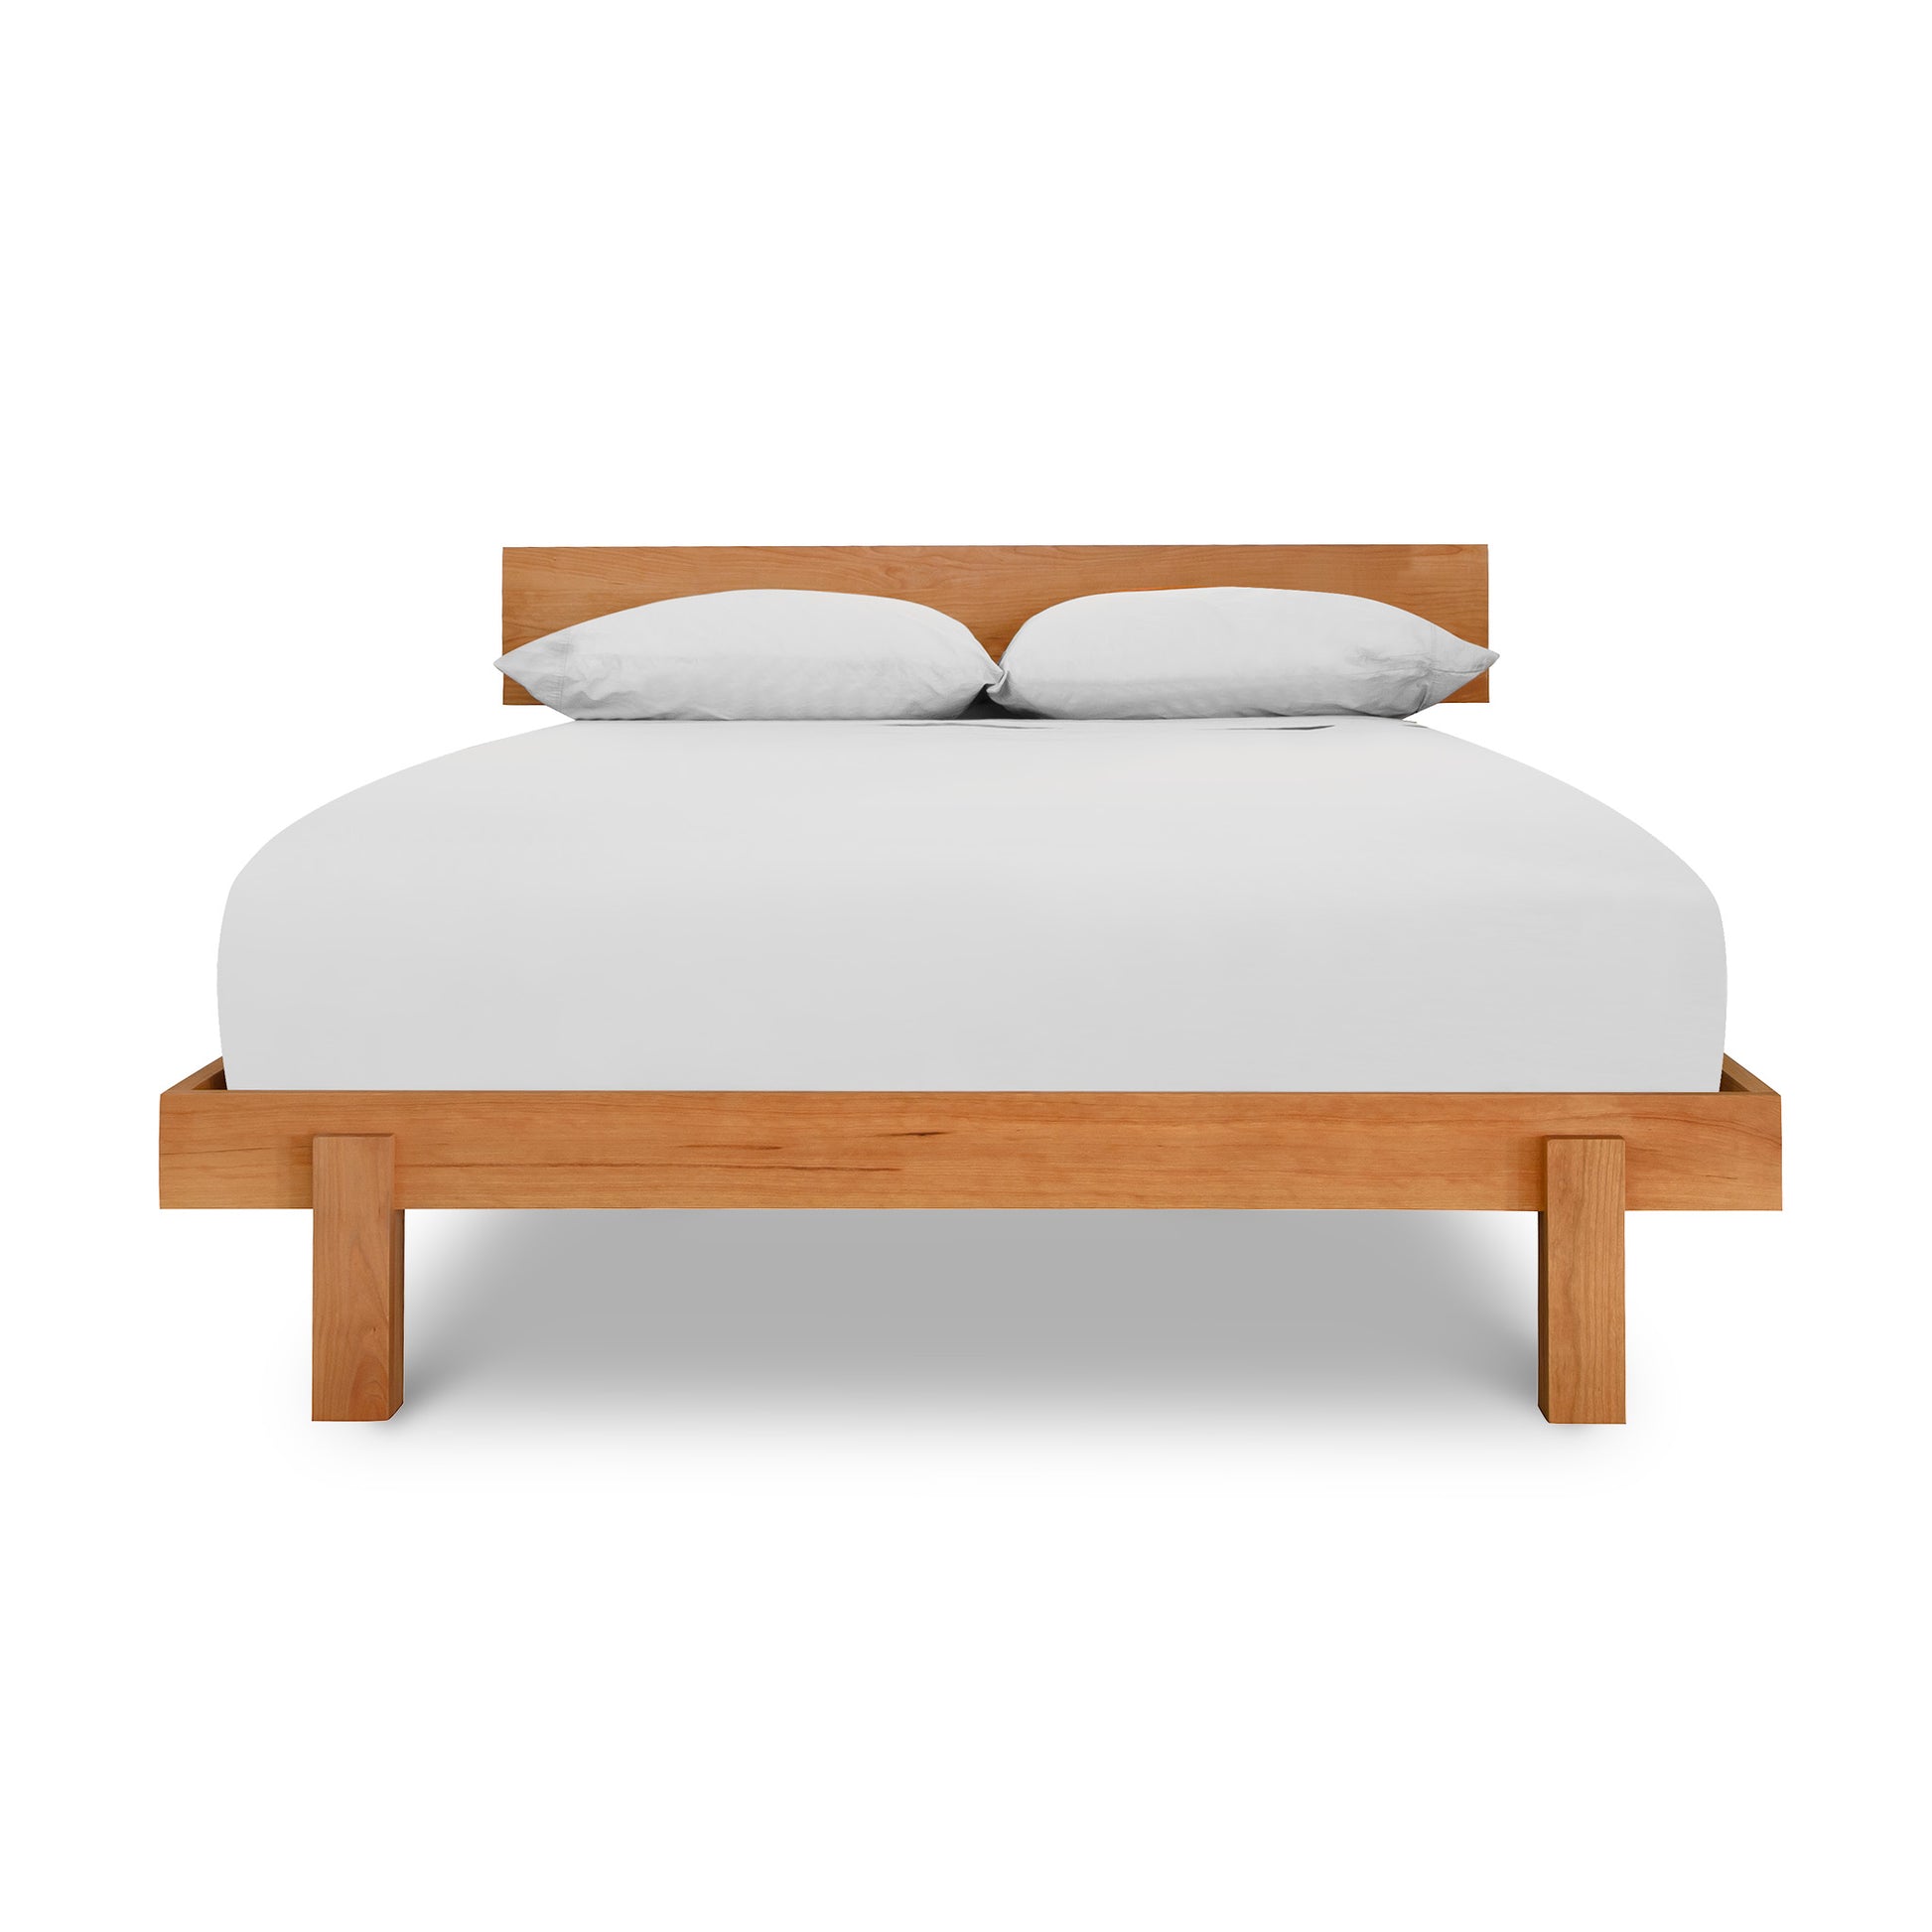 A solid wood Vermont Furniture Designs Kipling Platform Bed frame with a white mattress and two pillows against a white background.